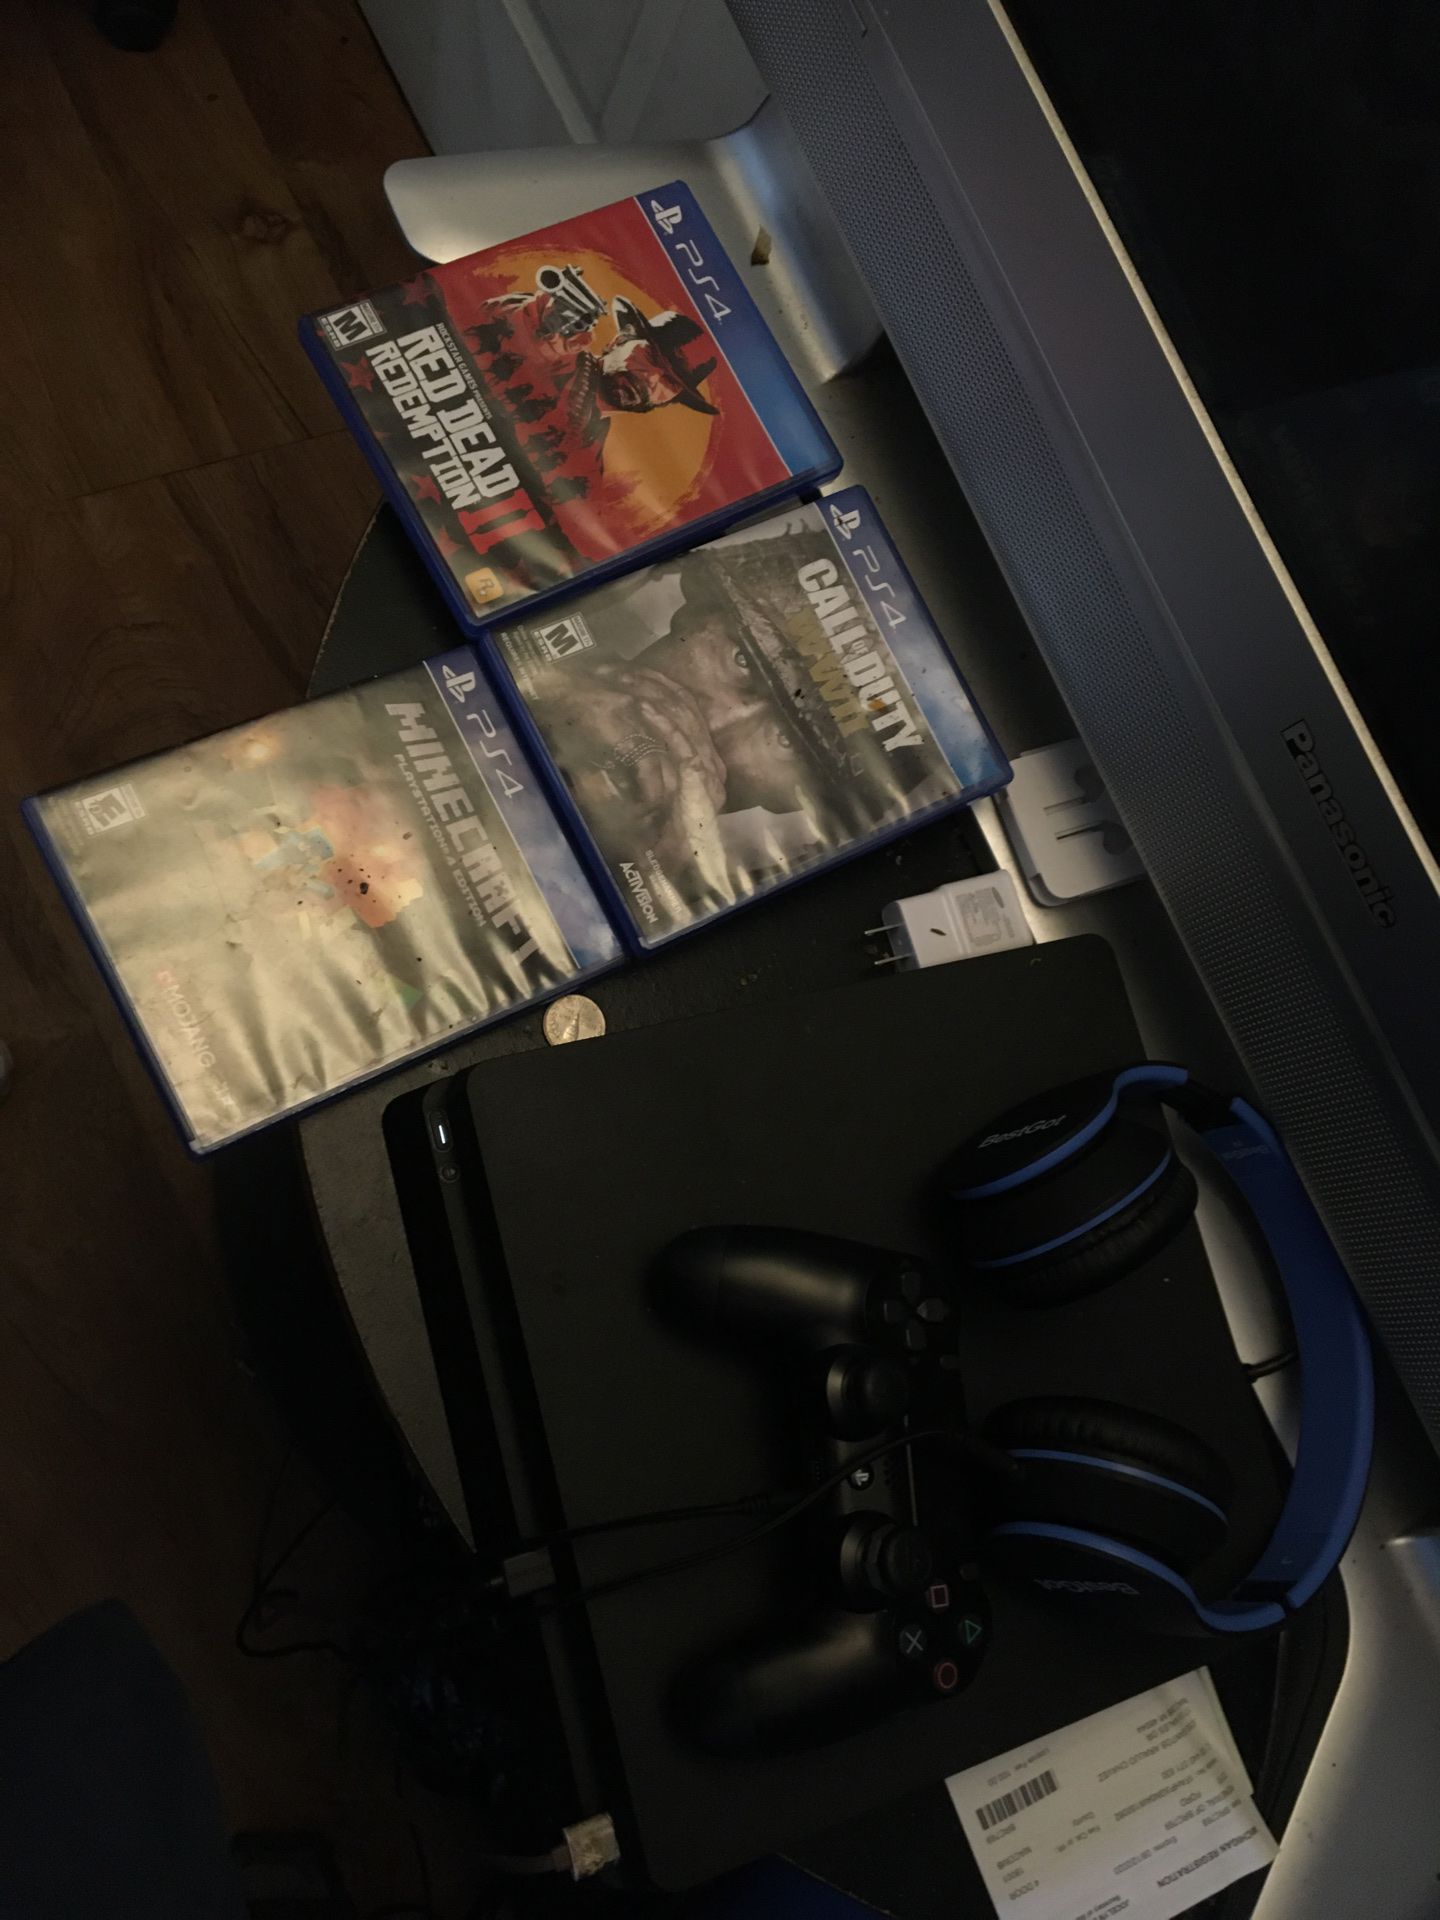 PS4 for sale,, comes with minecraft, rocket league, gta 5, COD WWII with headphones and controller all cables included.